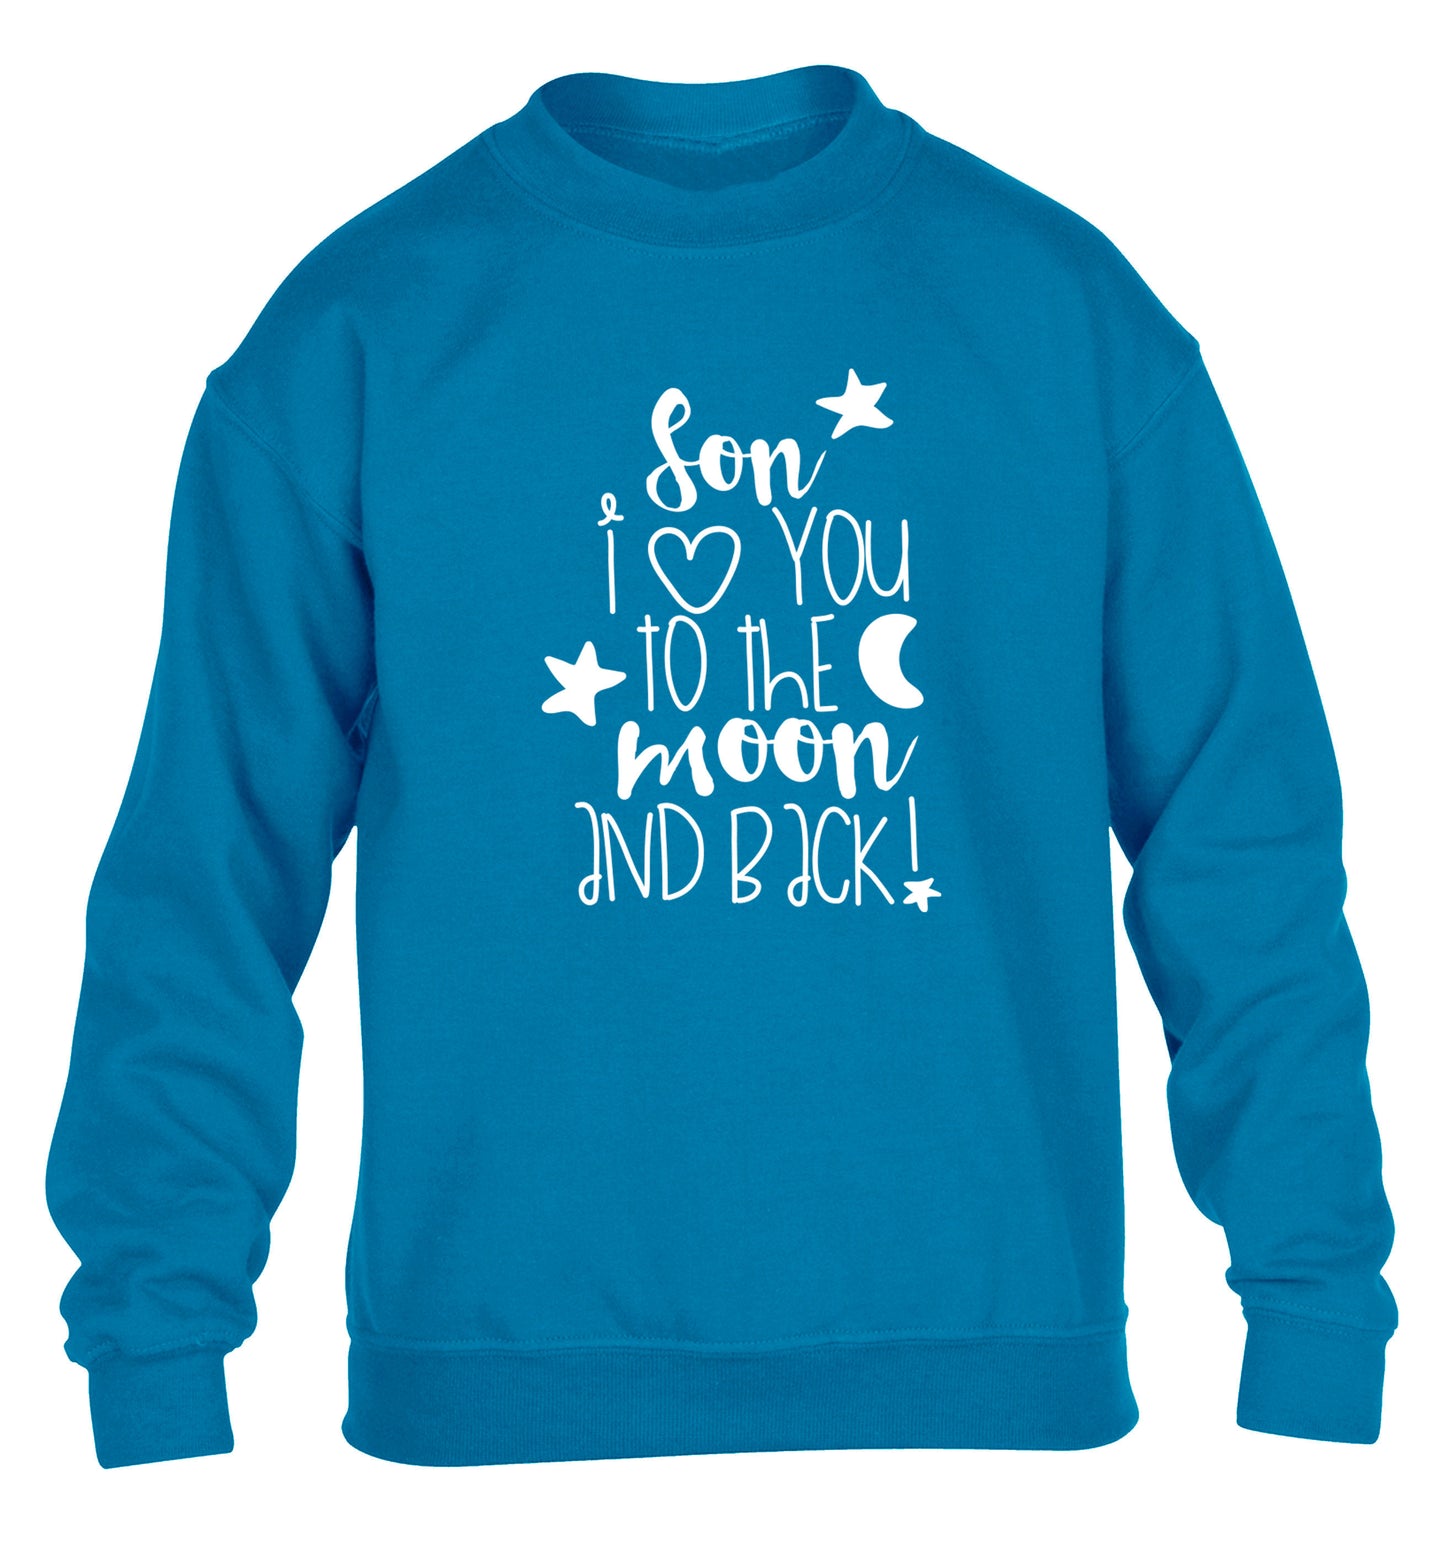 Son I love you to the moon and back children's blue  sweater 12-14 Years